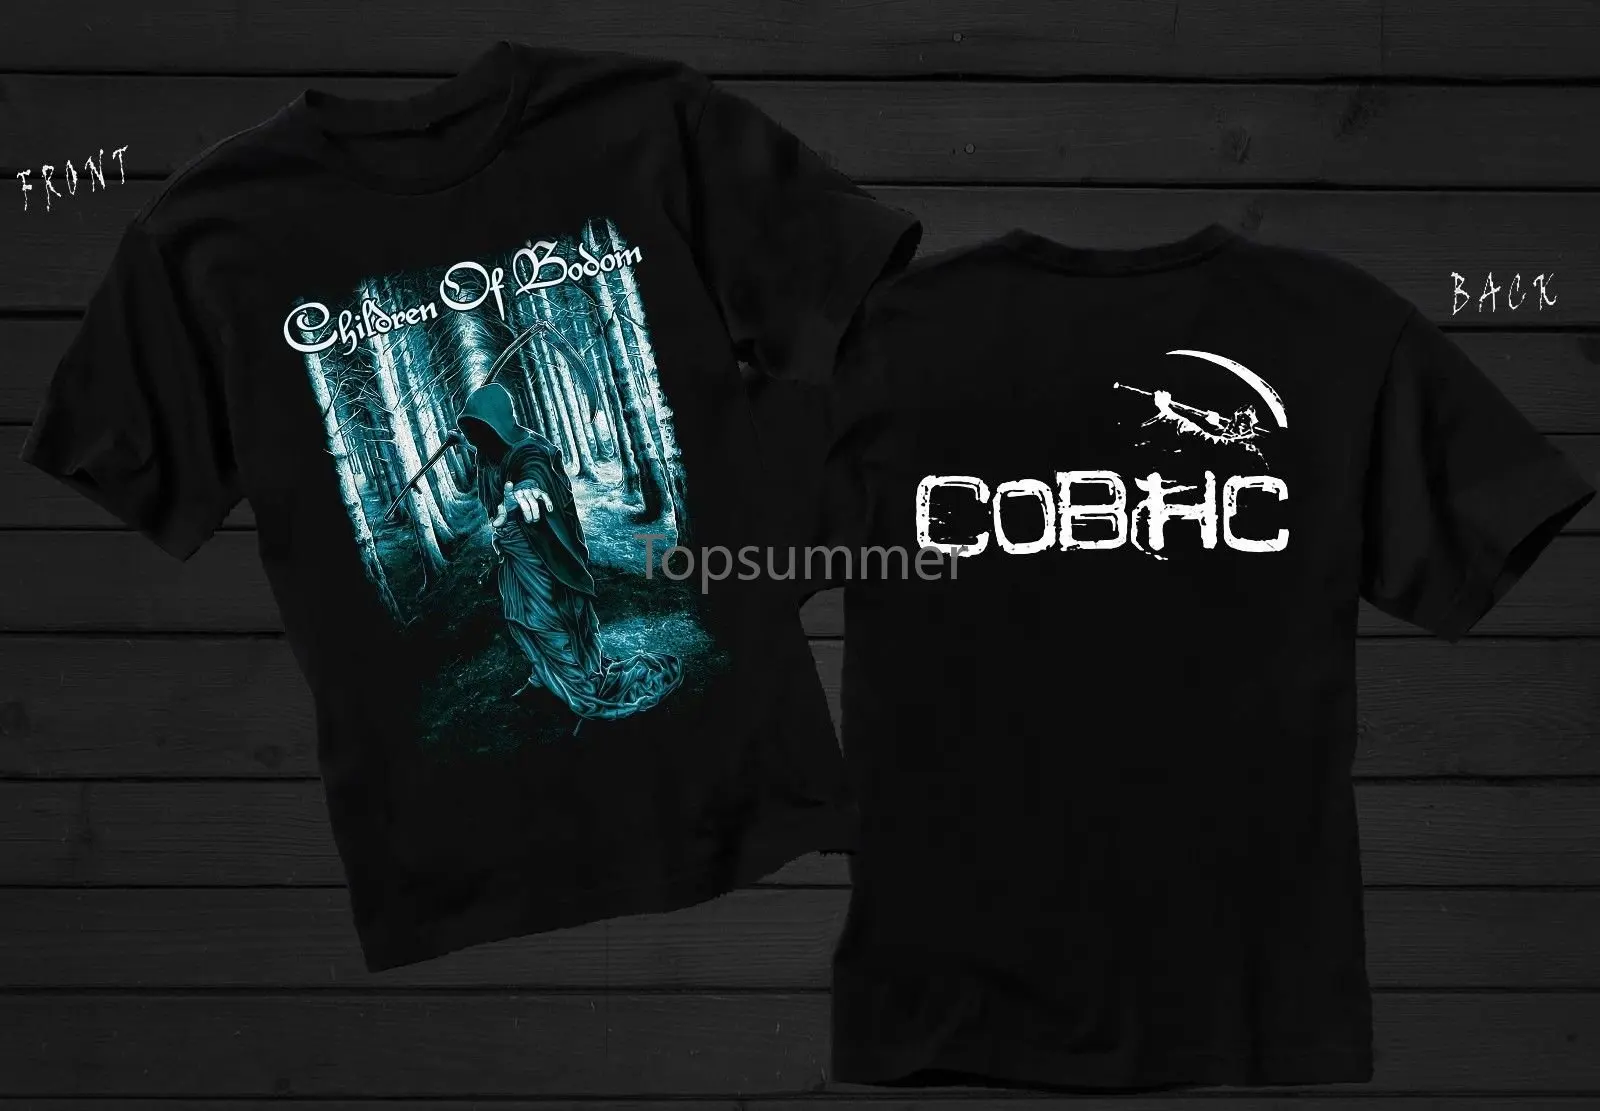 

Children Of Bodom Finland Melodic Death Metal Band Tshitr Sizes: S To 3Xl 100% Cotton Short Sleeve Summer T-Shirt